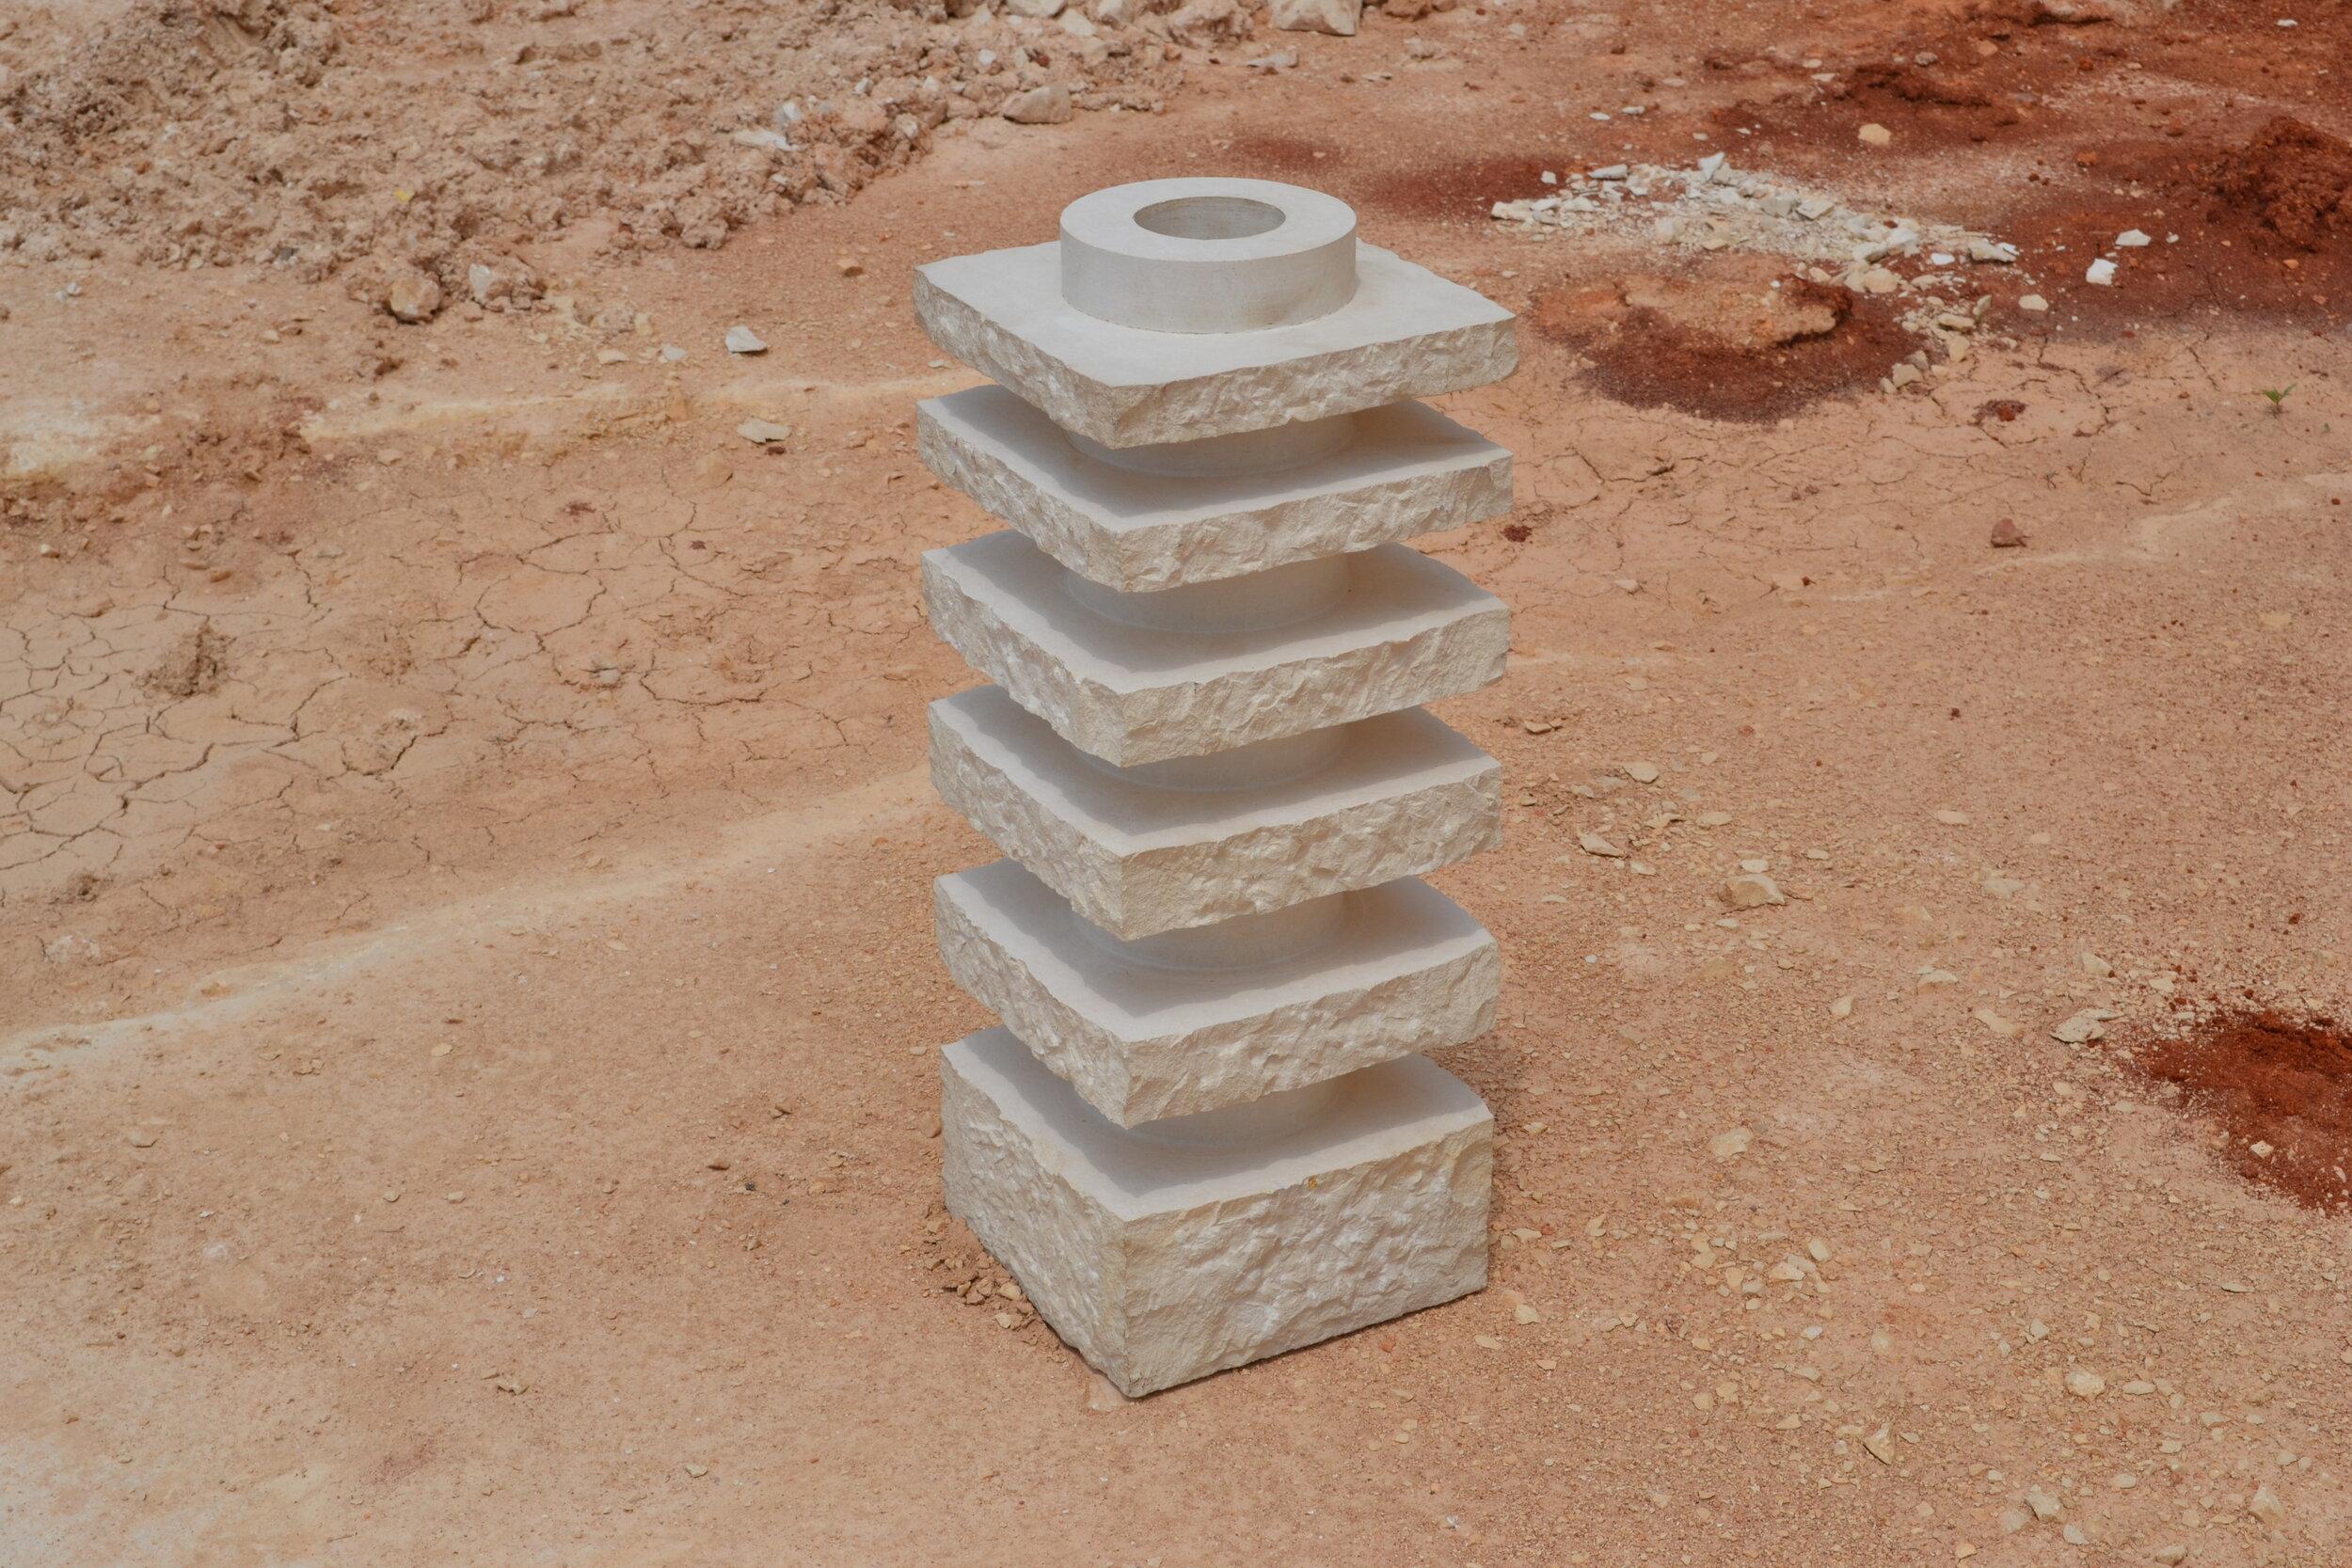 Single piece limestone block. Machine and handcrafted.

*Opening depth: 36cm with a diameter of 8cm.

On the side of the vase at bottom level there is a small opening closed with a metal screw intended for letting the water out. The vase can be